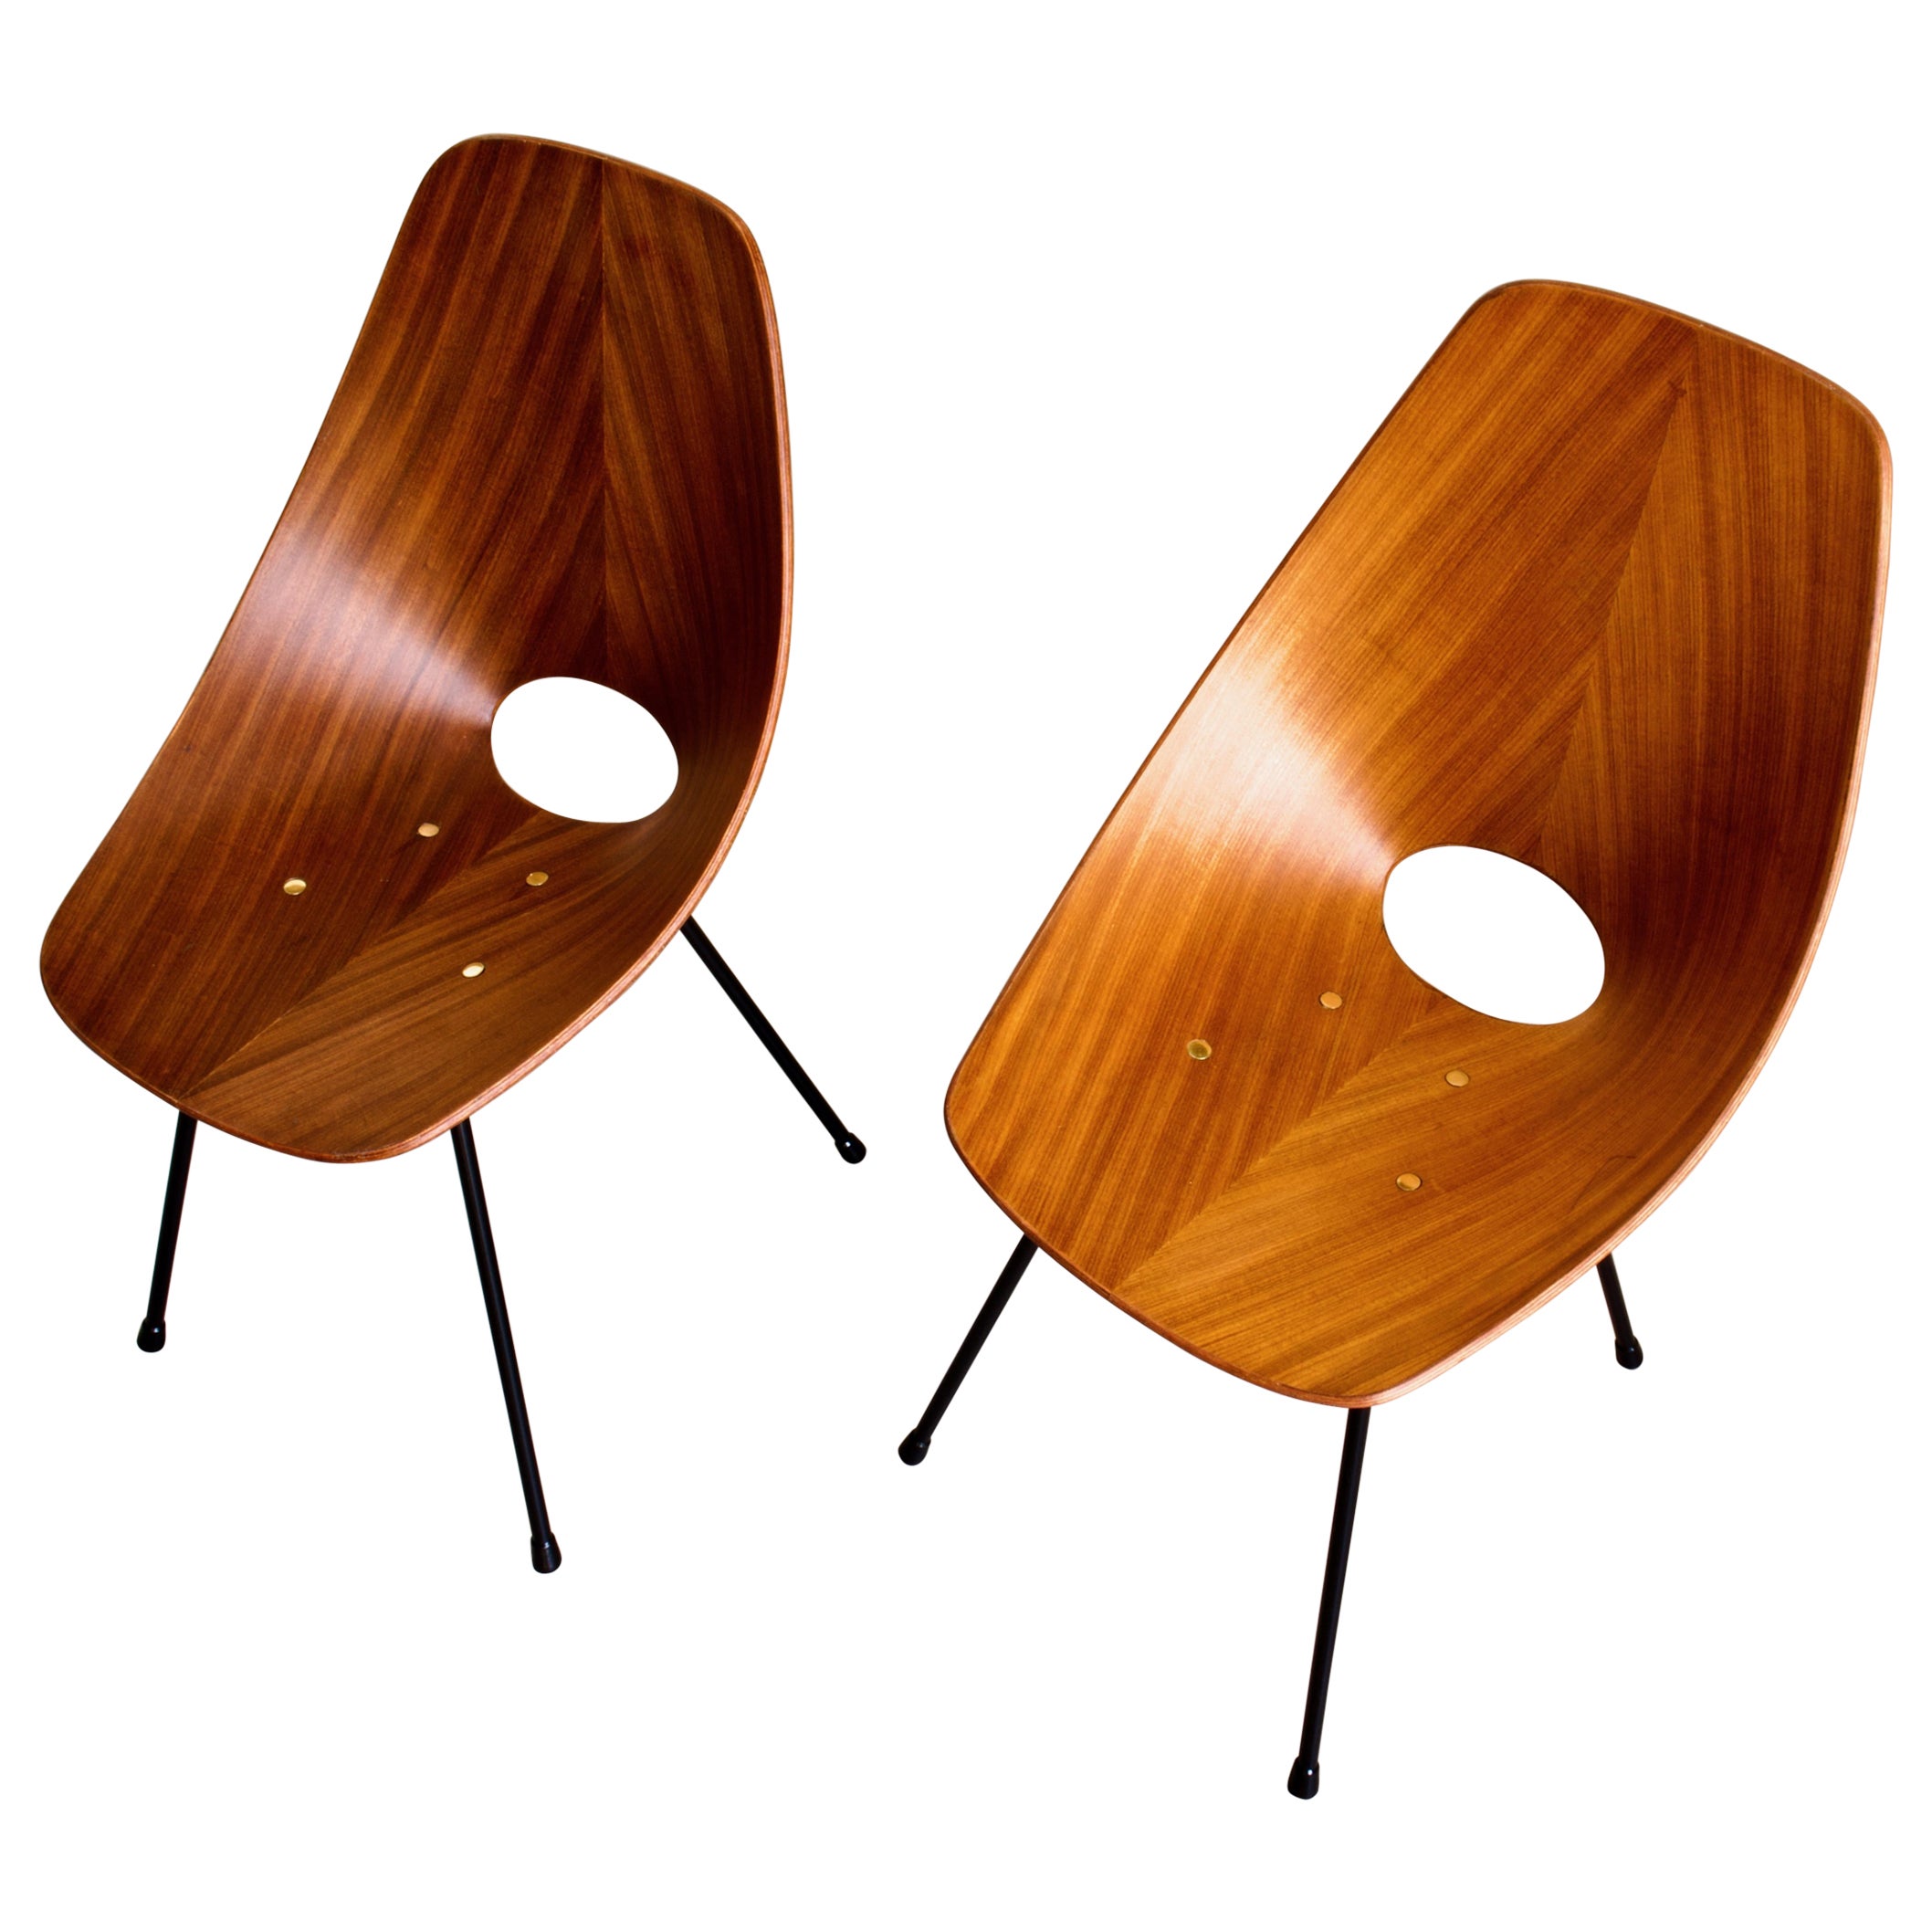 Fully Restored Pair of Medea Side Chairs in Exotic Hardwood, Nobili, 1955 Italy For Sale